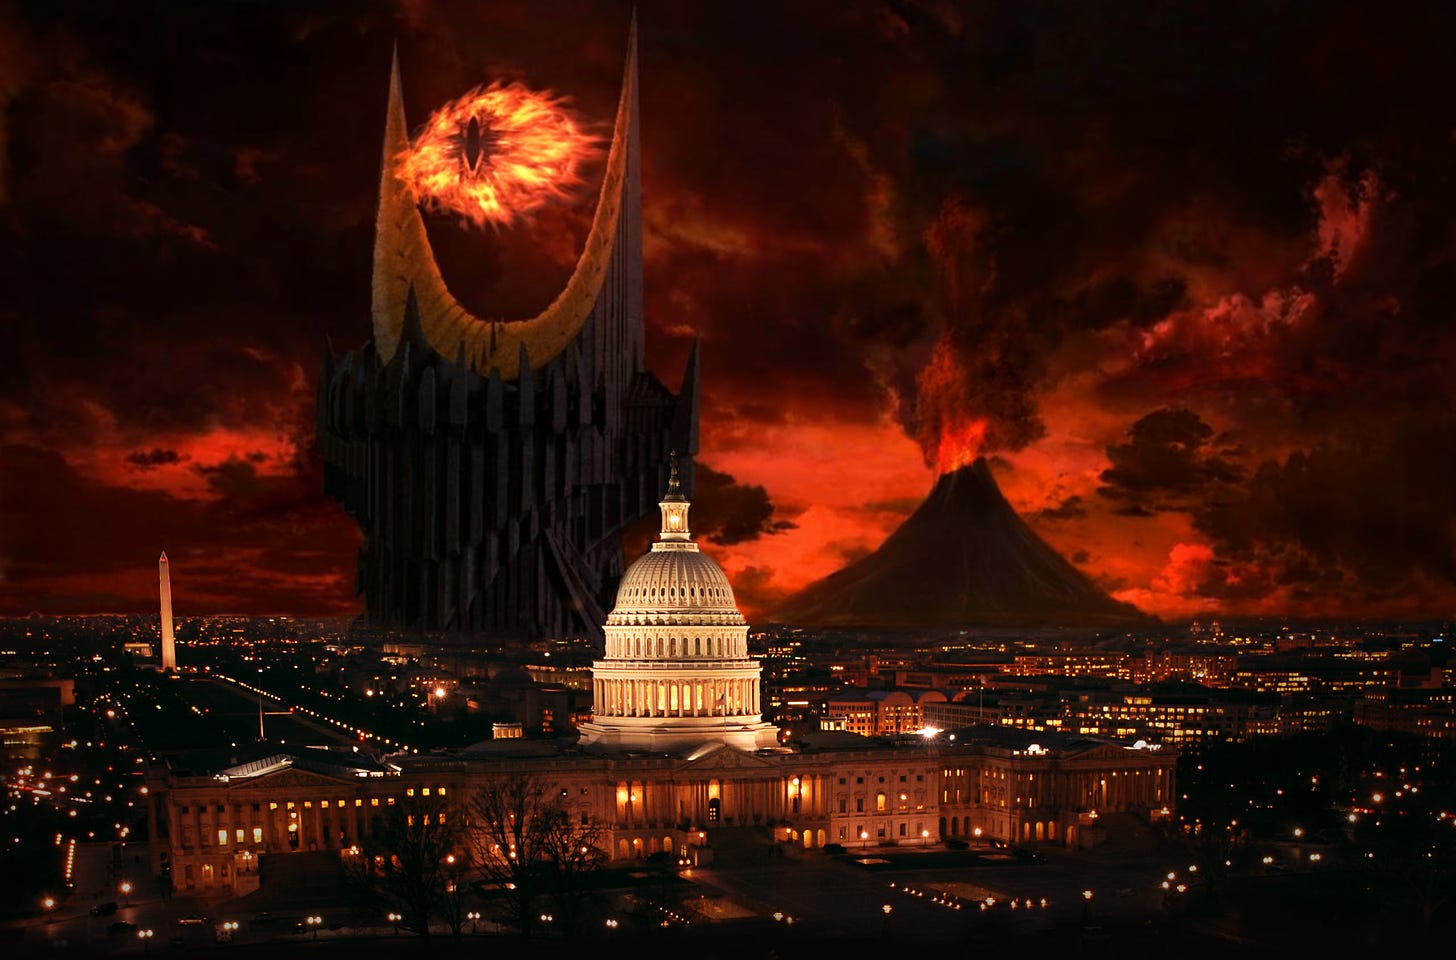 eye of sauron atop a tower in mordor on the potomac aka the district of corruption